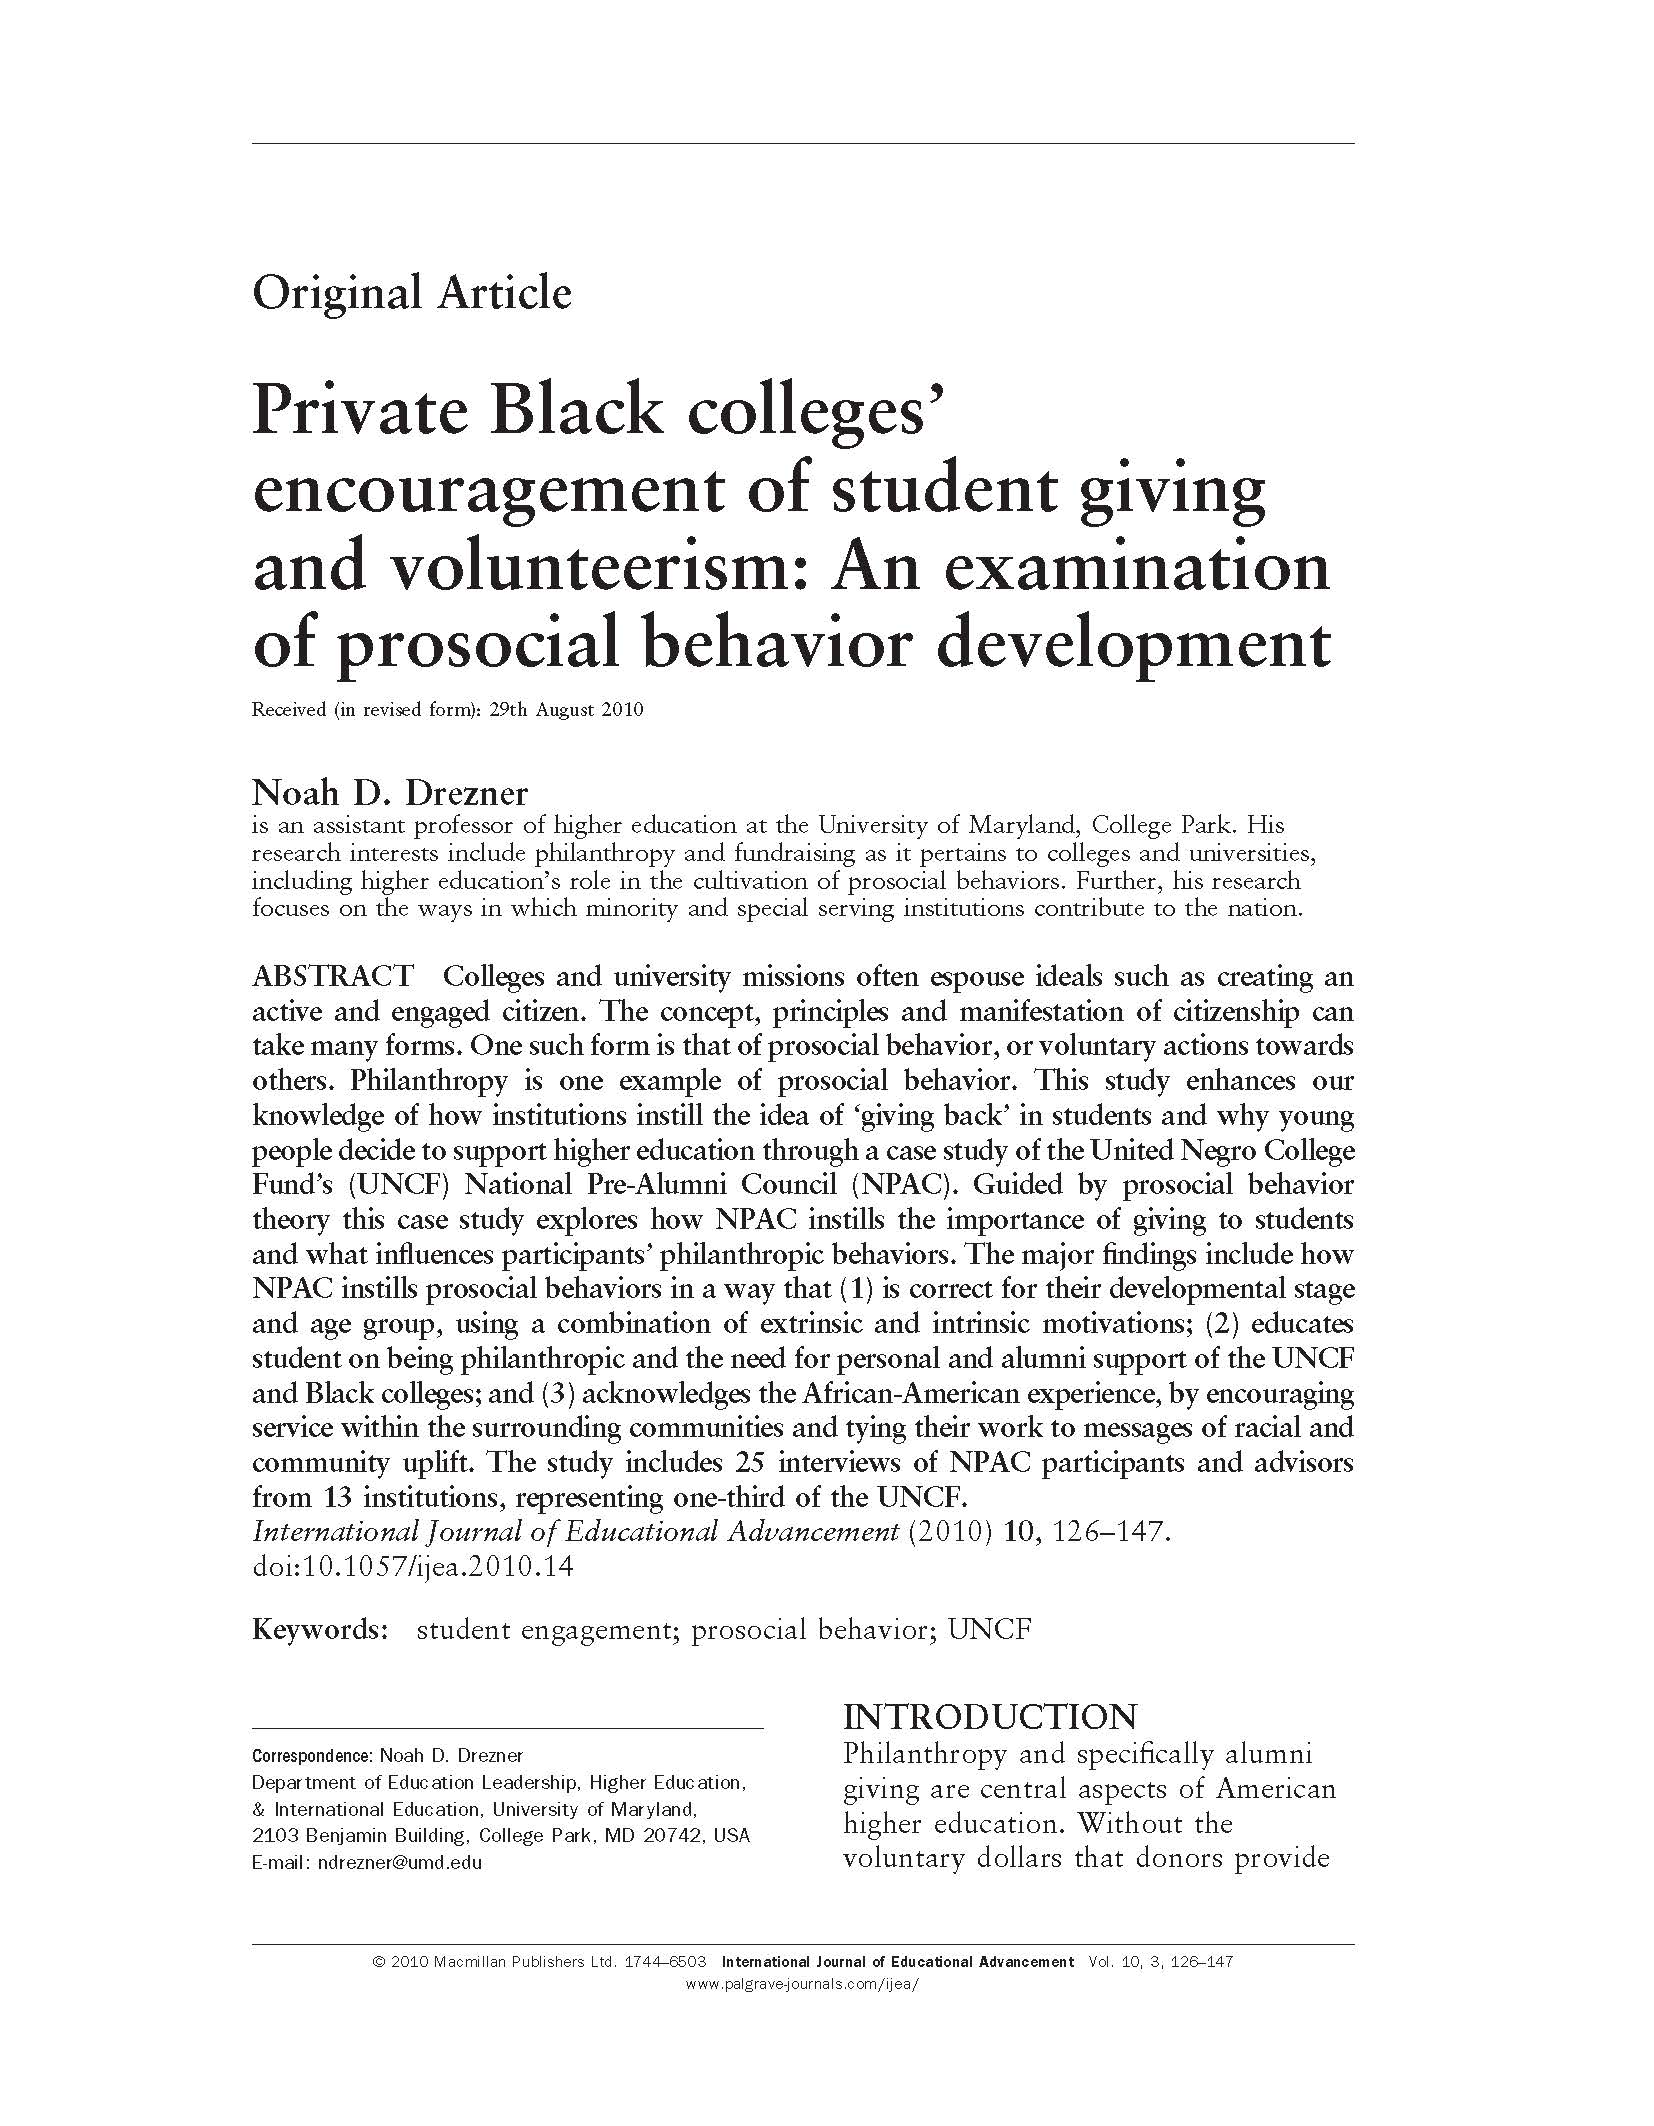 Private Black colleges’ encouragement of student giving and volunteerism: An examination of prosocial behavior development